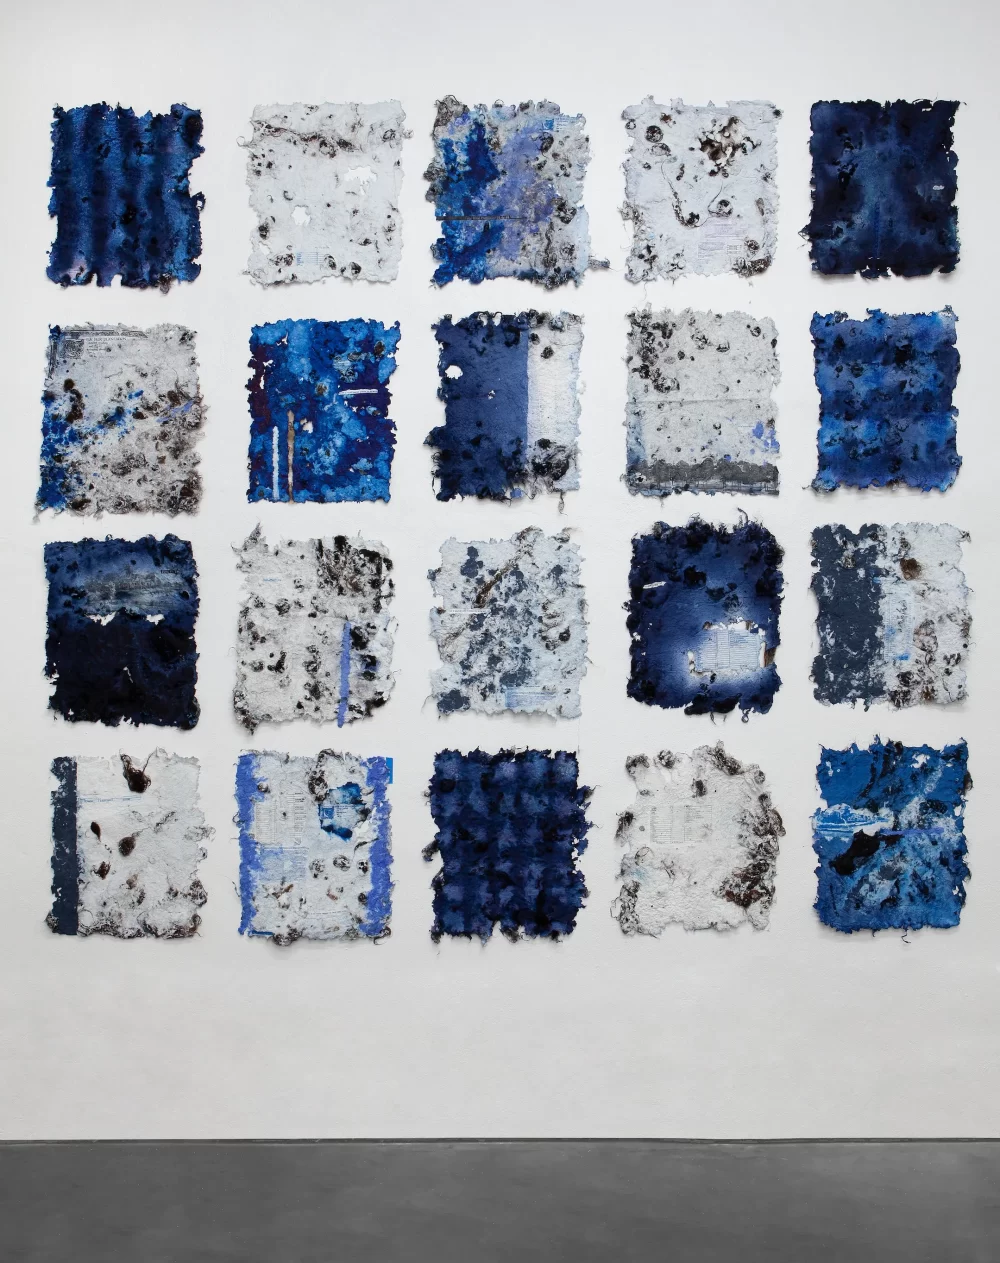 20 blue and white rectangles of hand-made paper exist as a grid on a white gallery wall. Each rectangle is different and some contain text and faint, printed imagery.